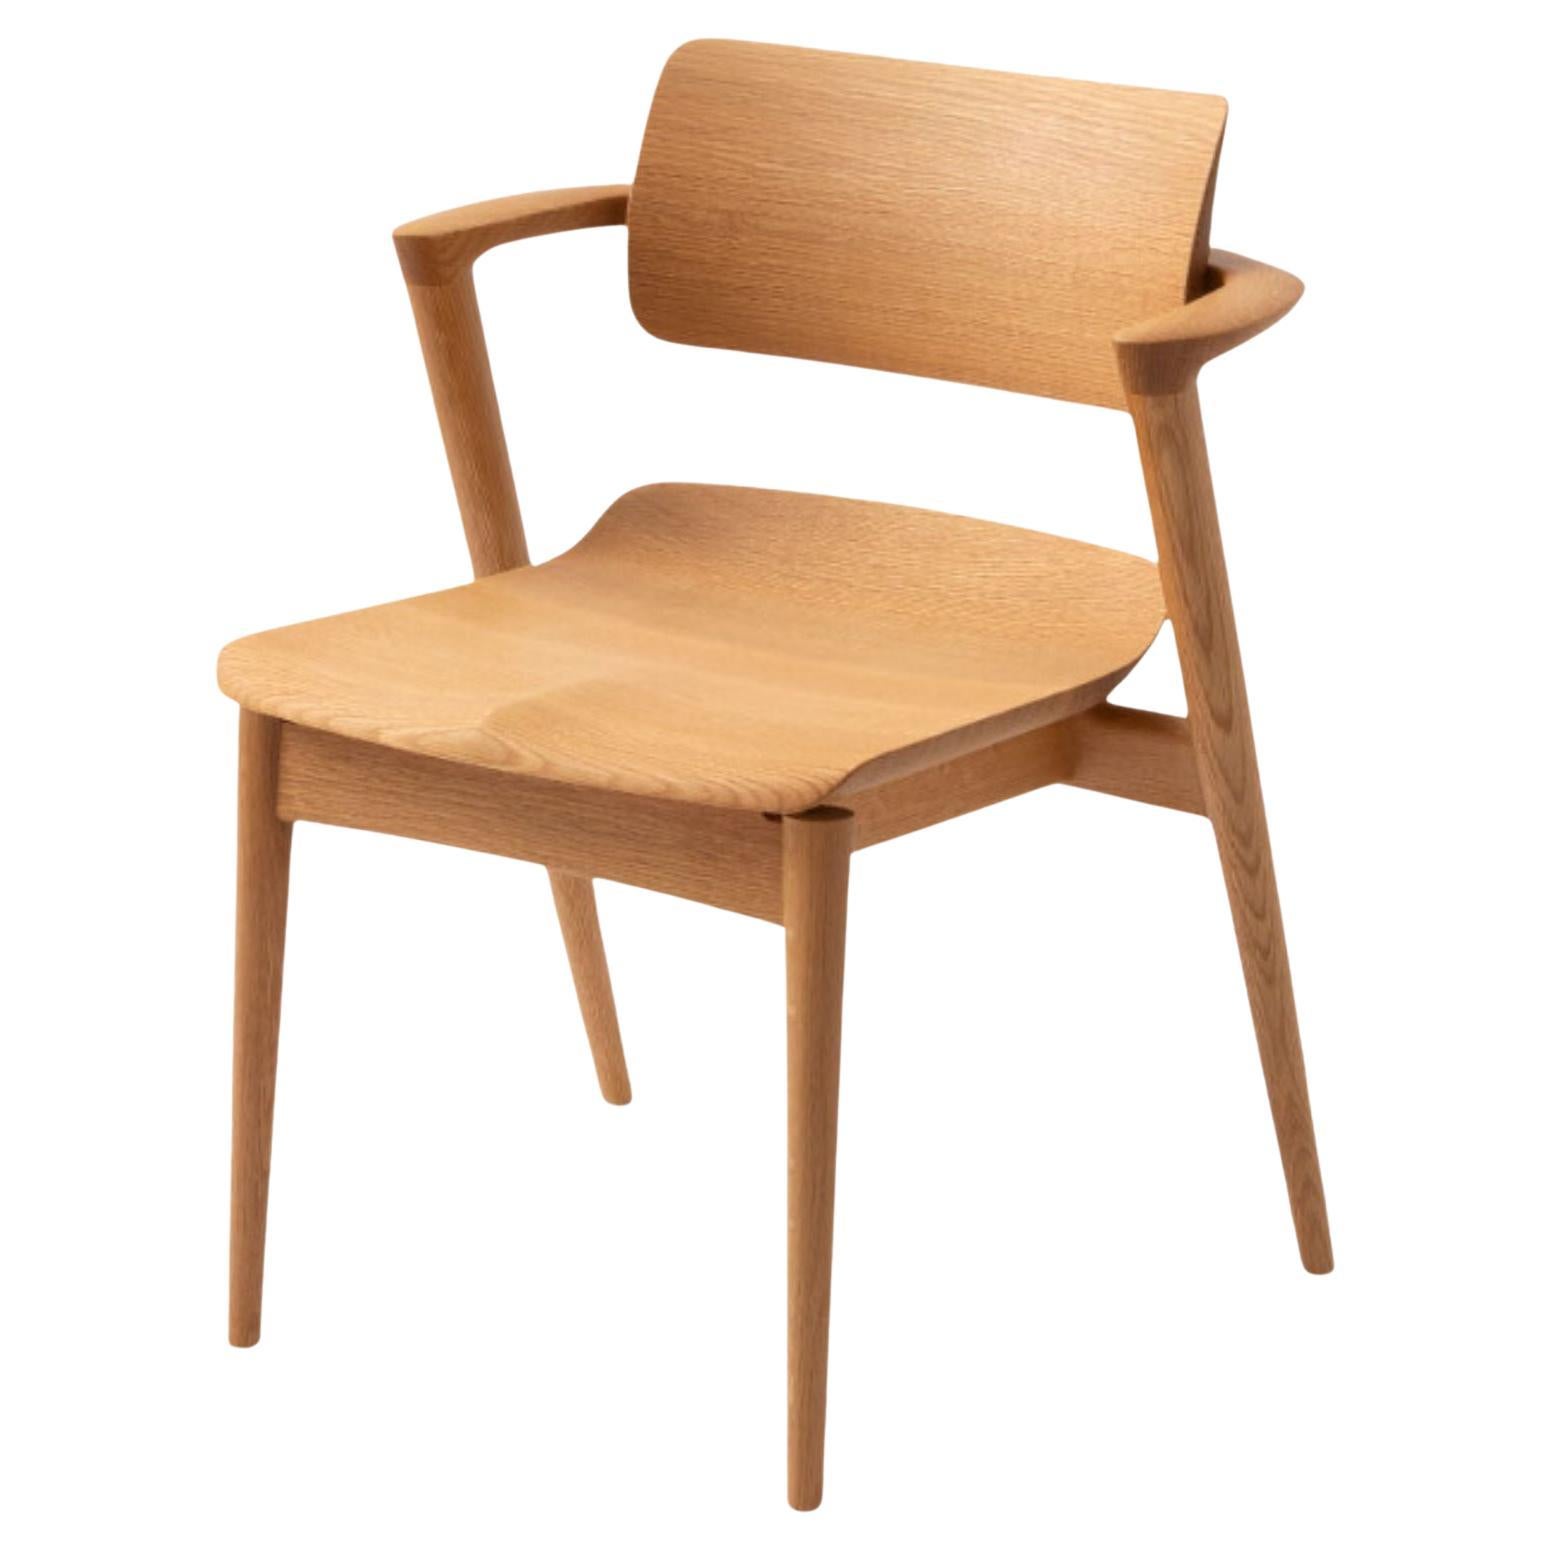 Motomi Kawakami 'Seoto-Ex KX251' Semi-Arm Dining Chair in Beech for Hida In New Condition For Sale In Glendale, CA